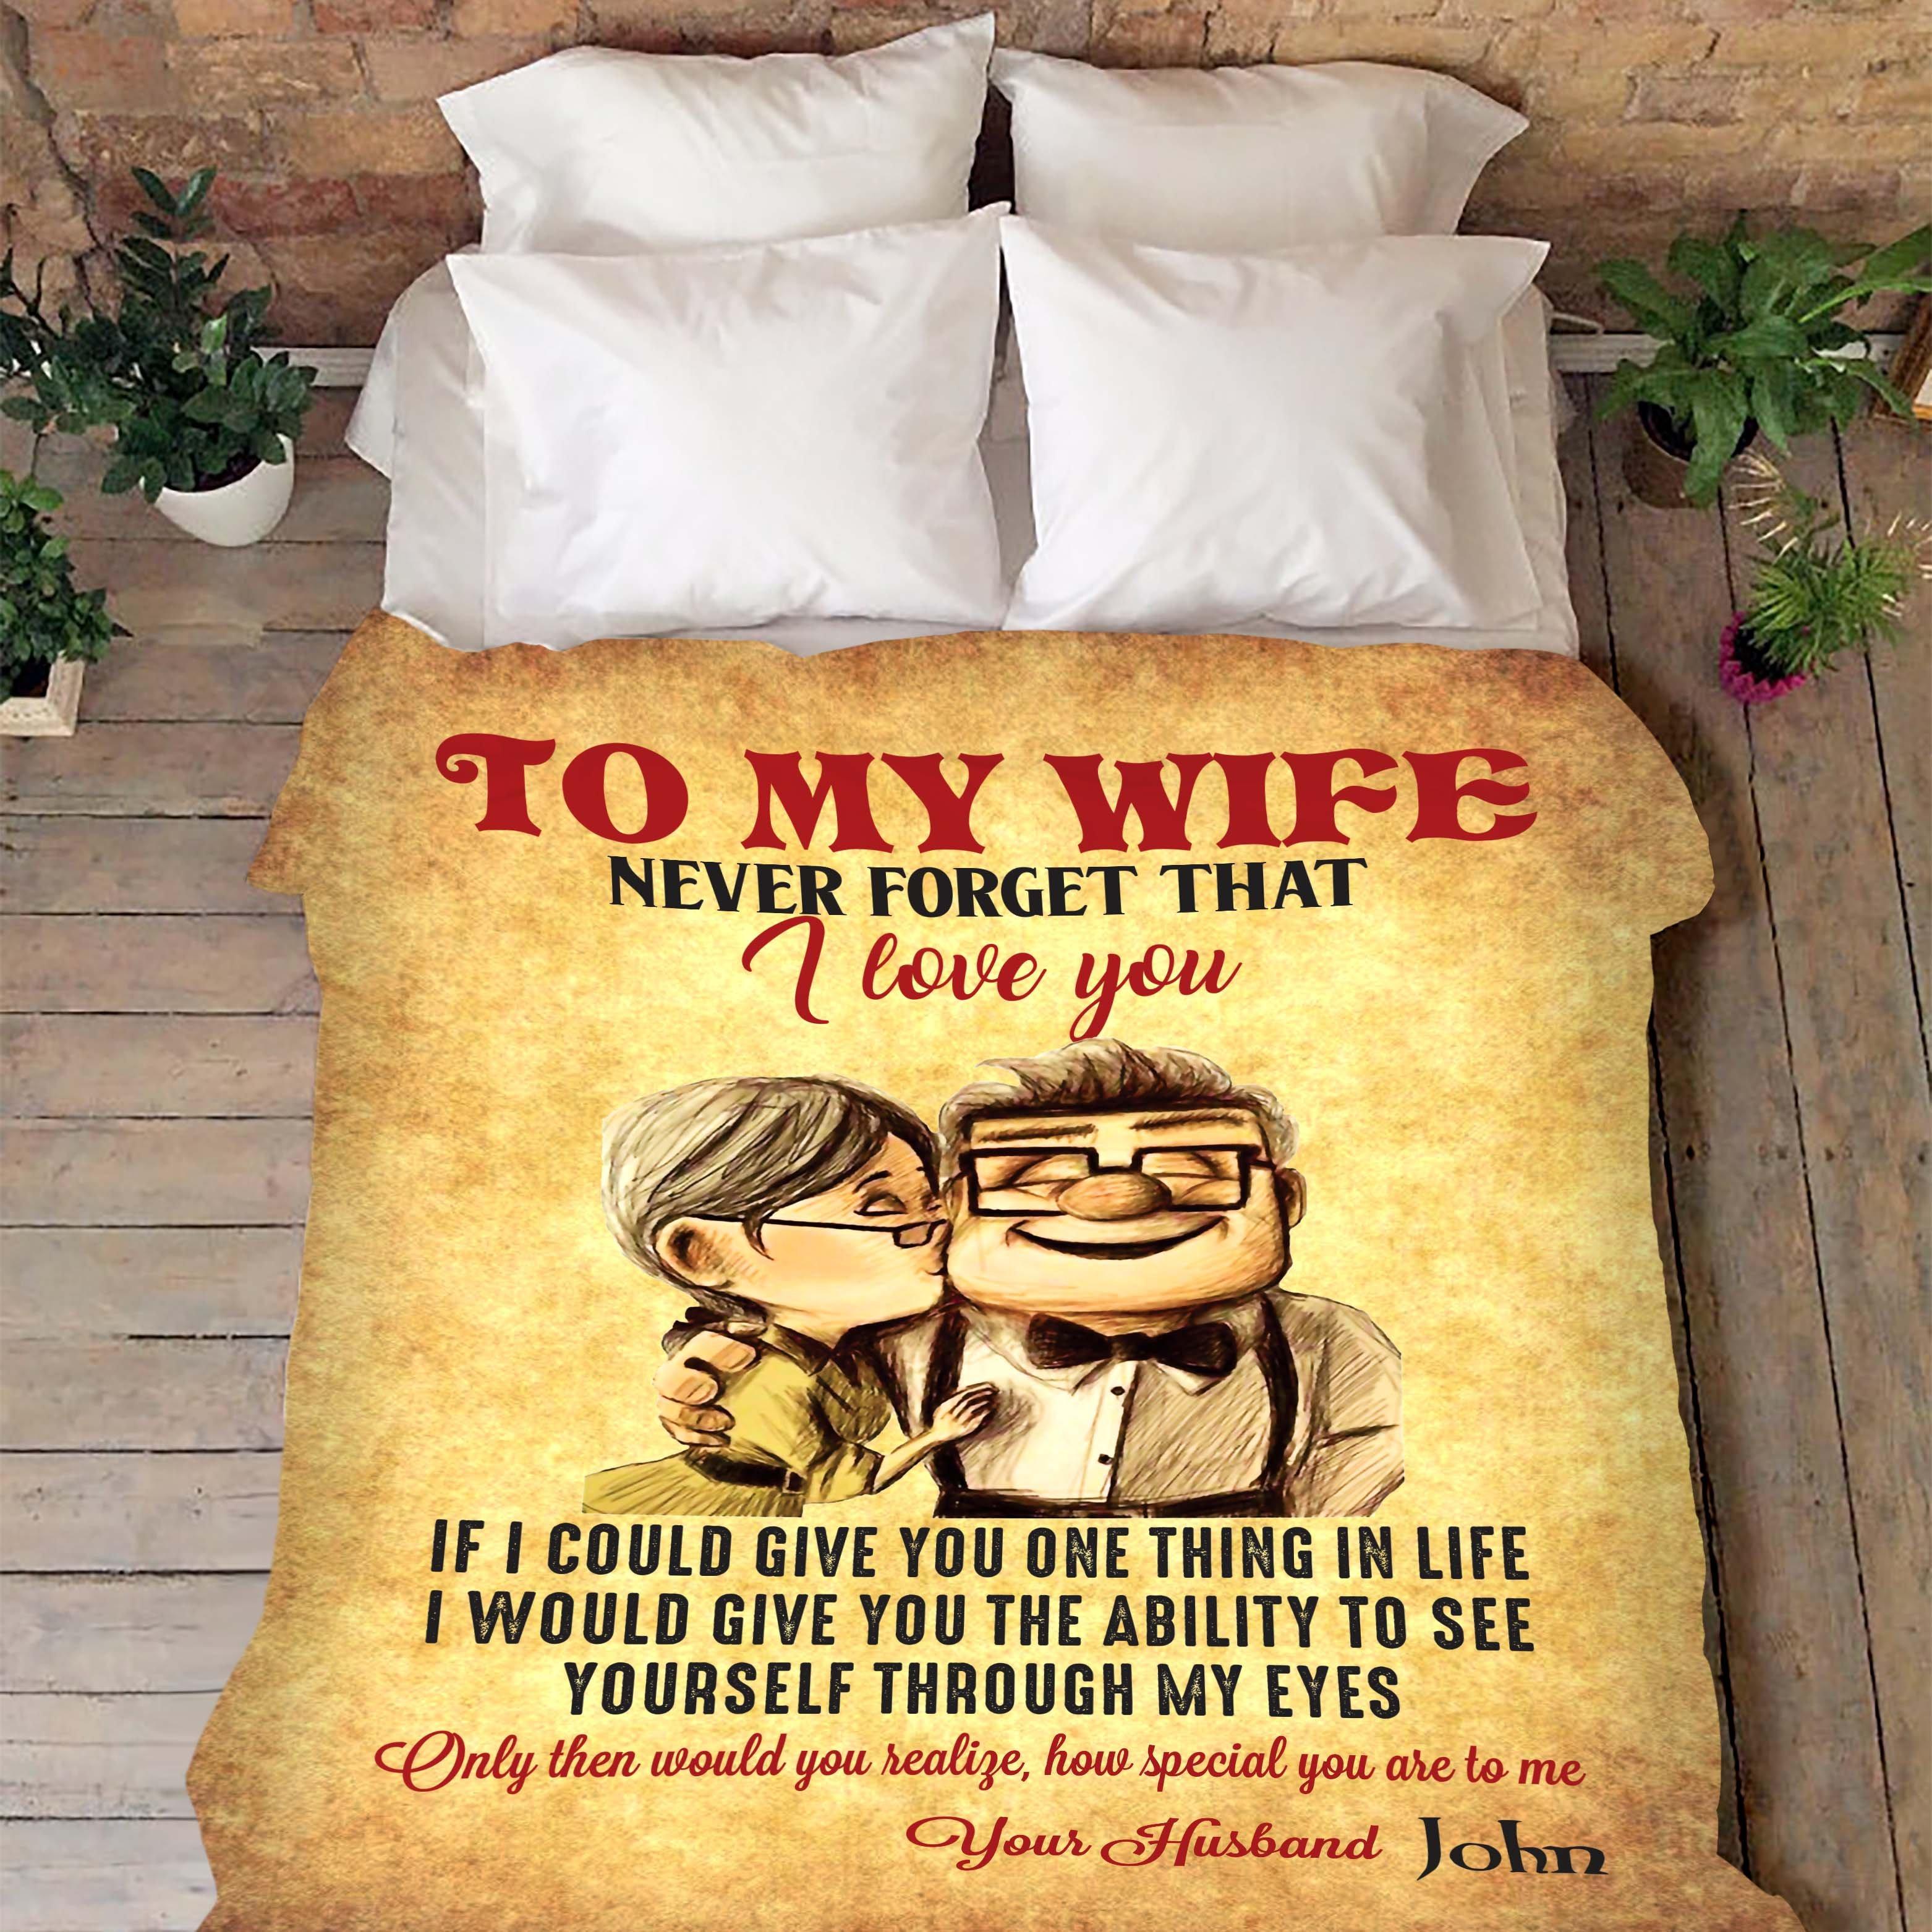 Up movie to my wife never forget that I love you blanket - original